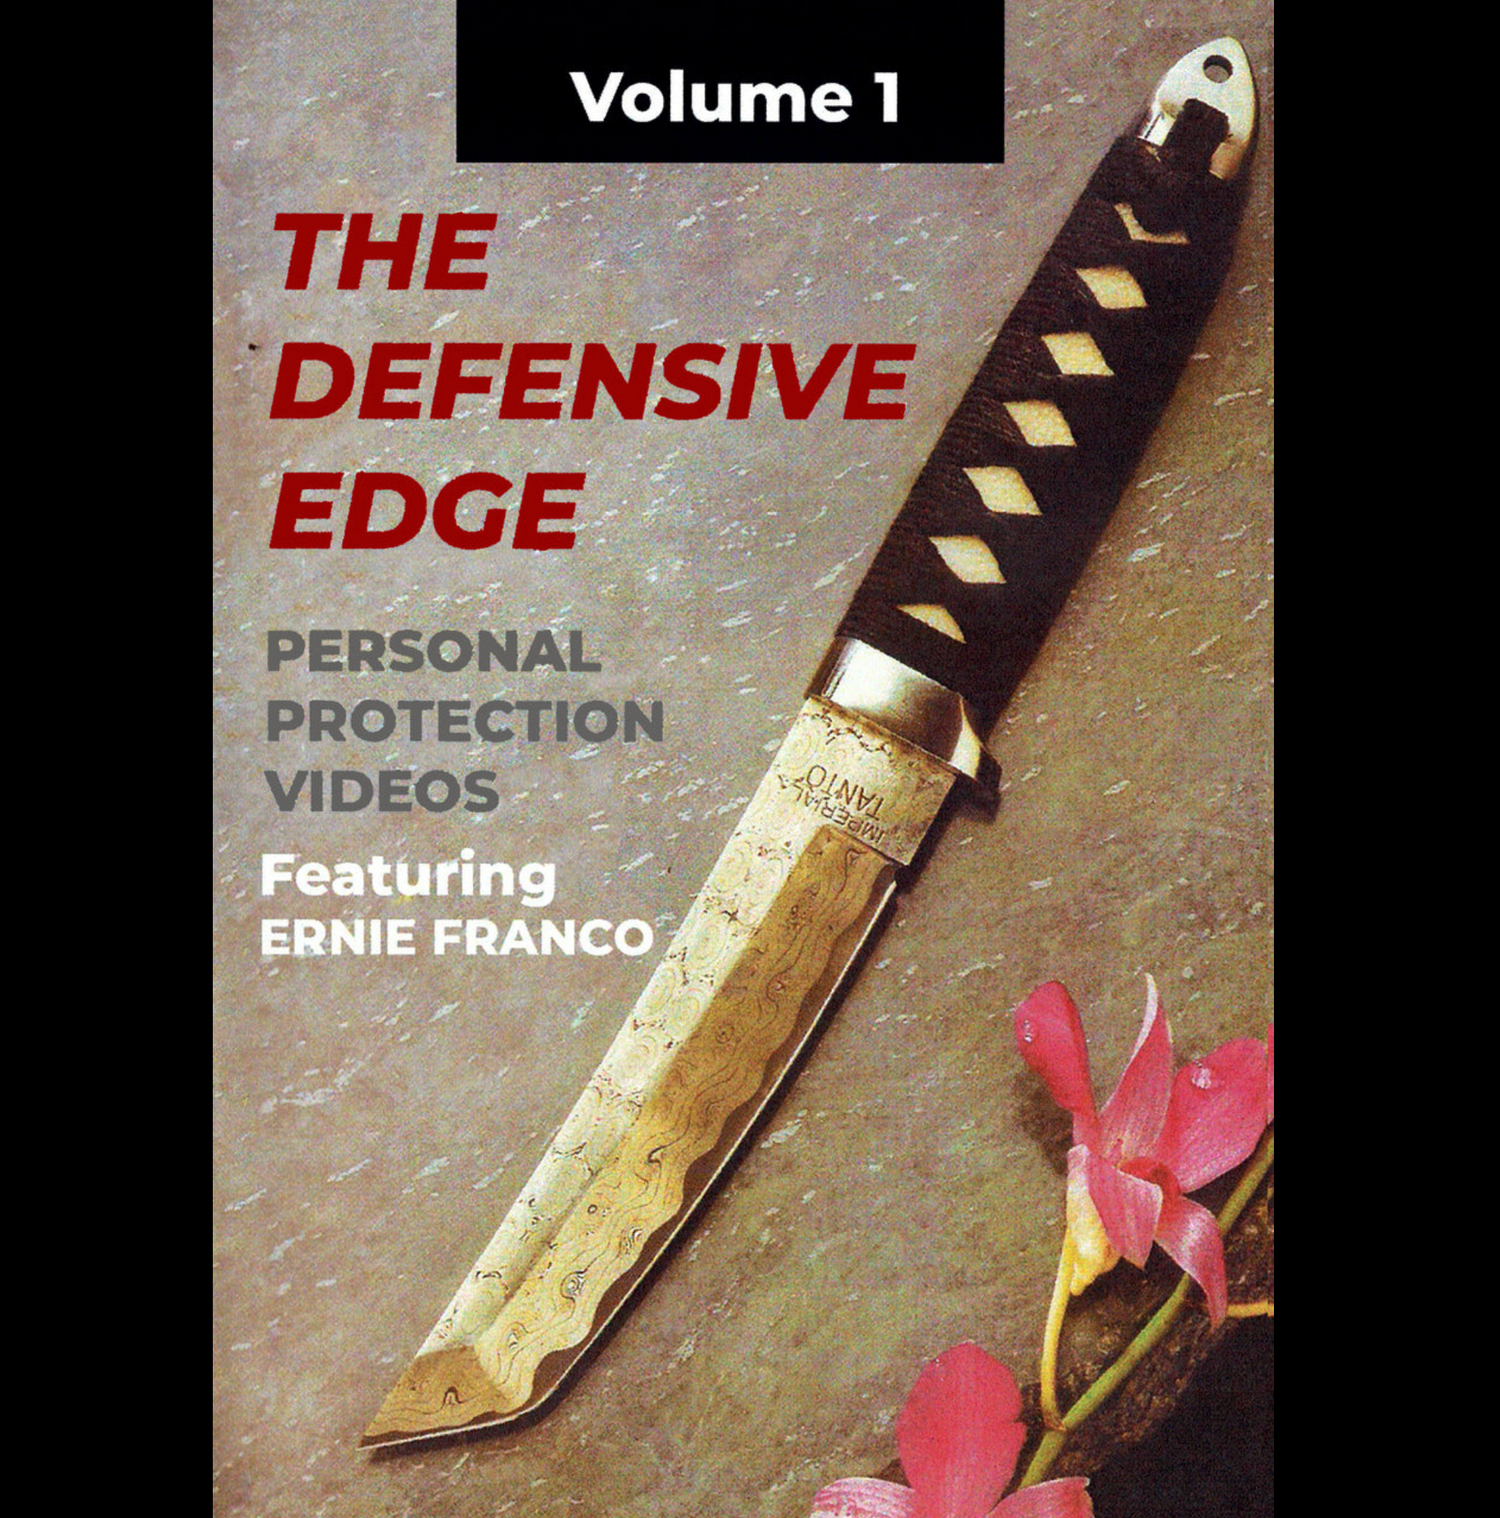 The Defensive Edge 1 by Ernie Franco (On Demand)